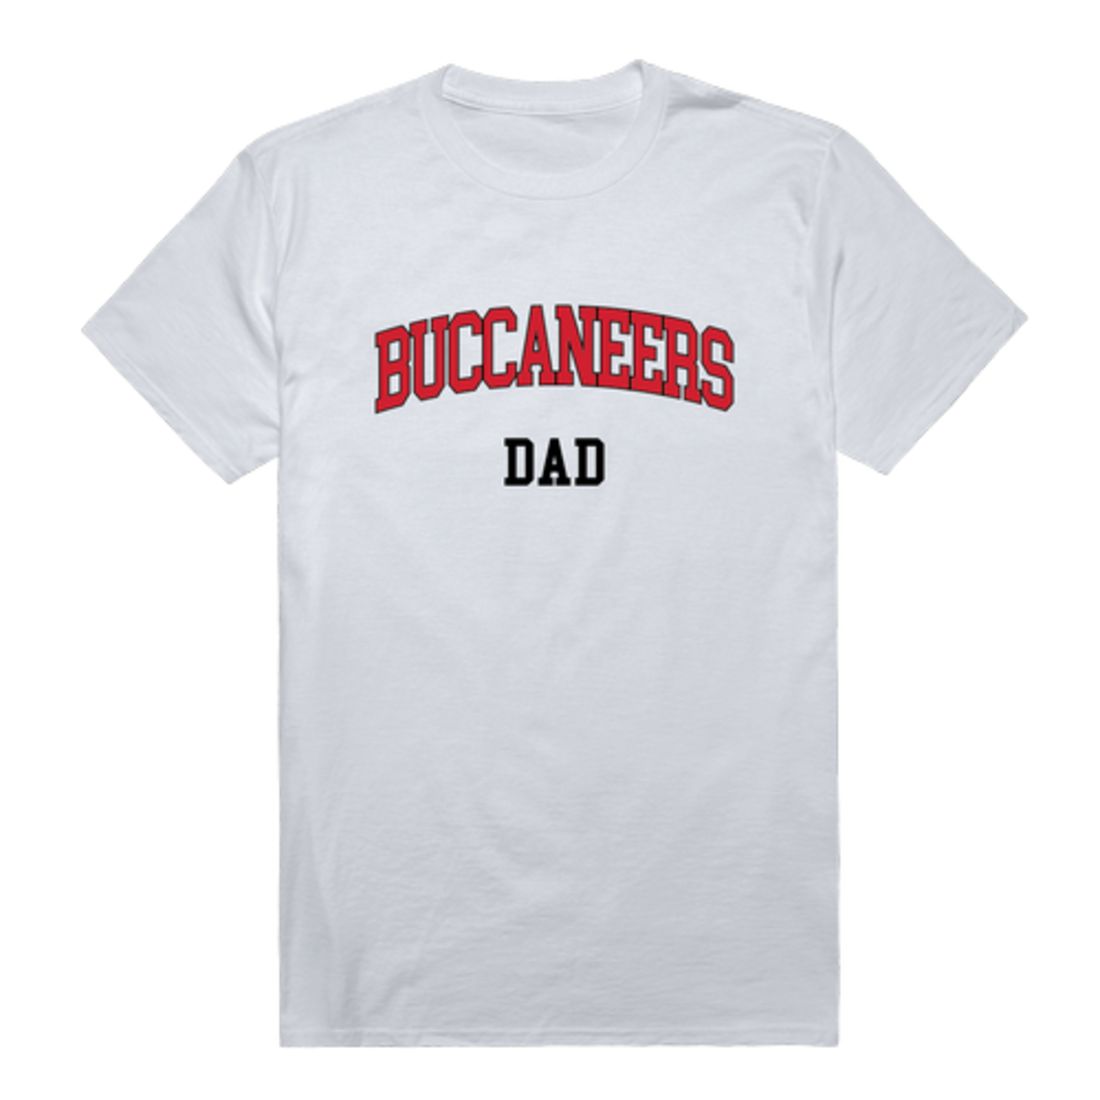 Christian Brothers University Buccaneers Dad T-Shirt